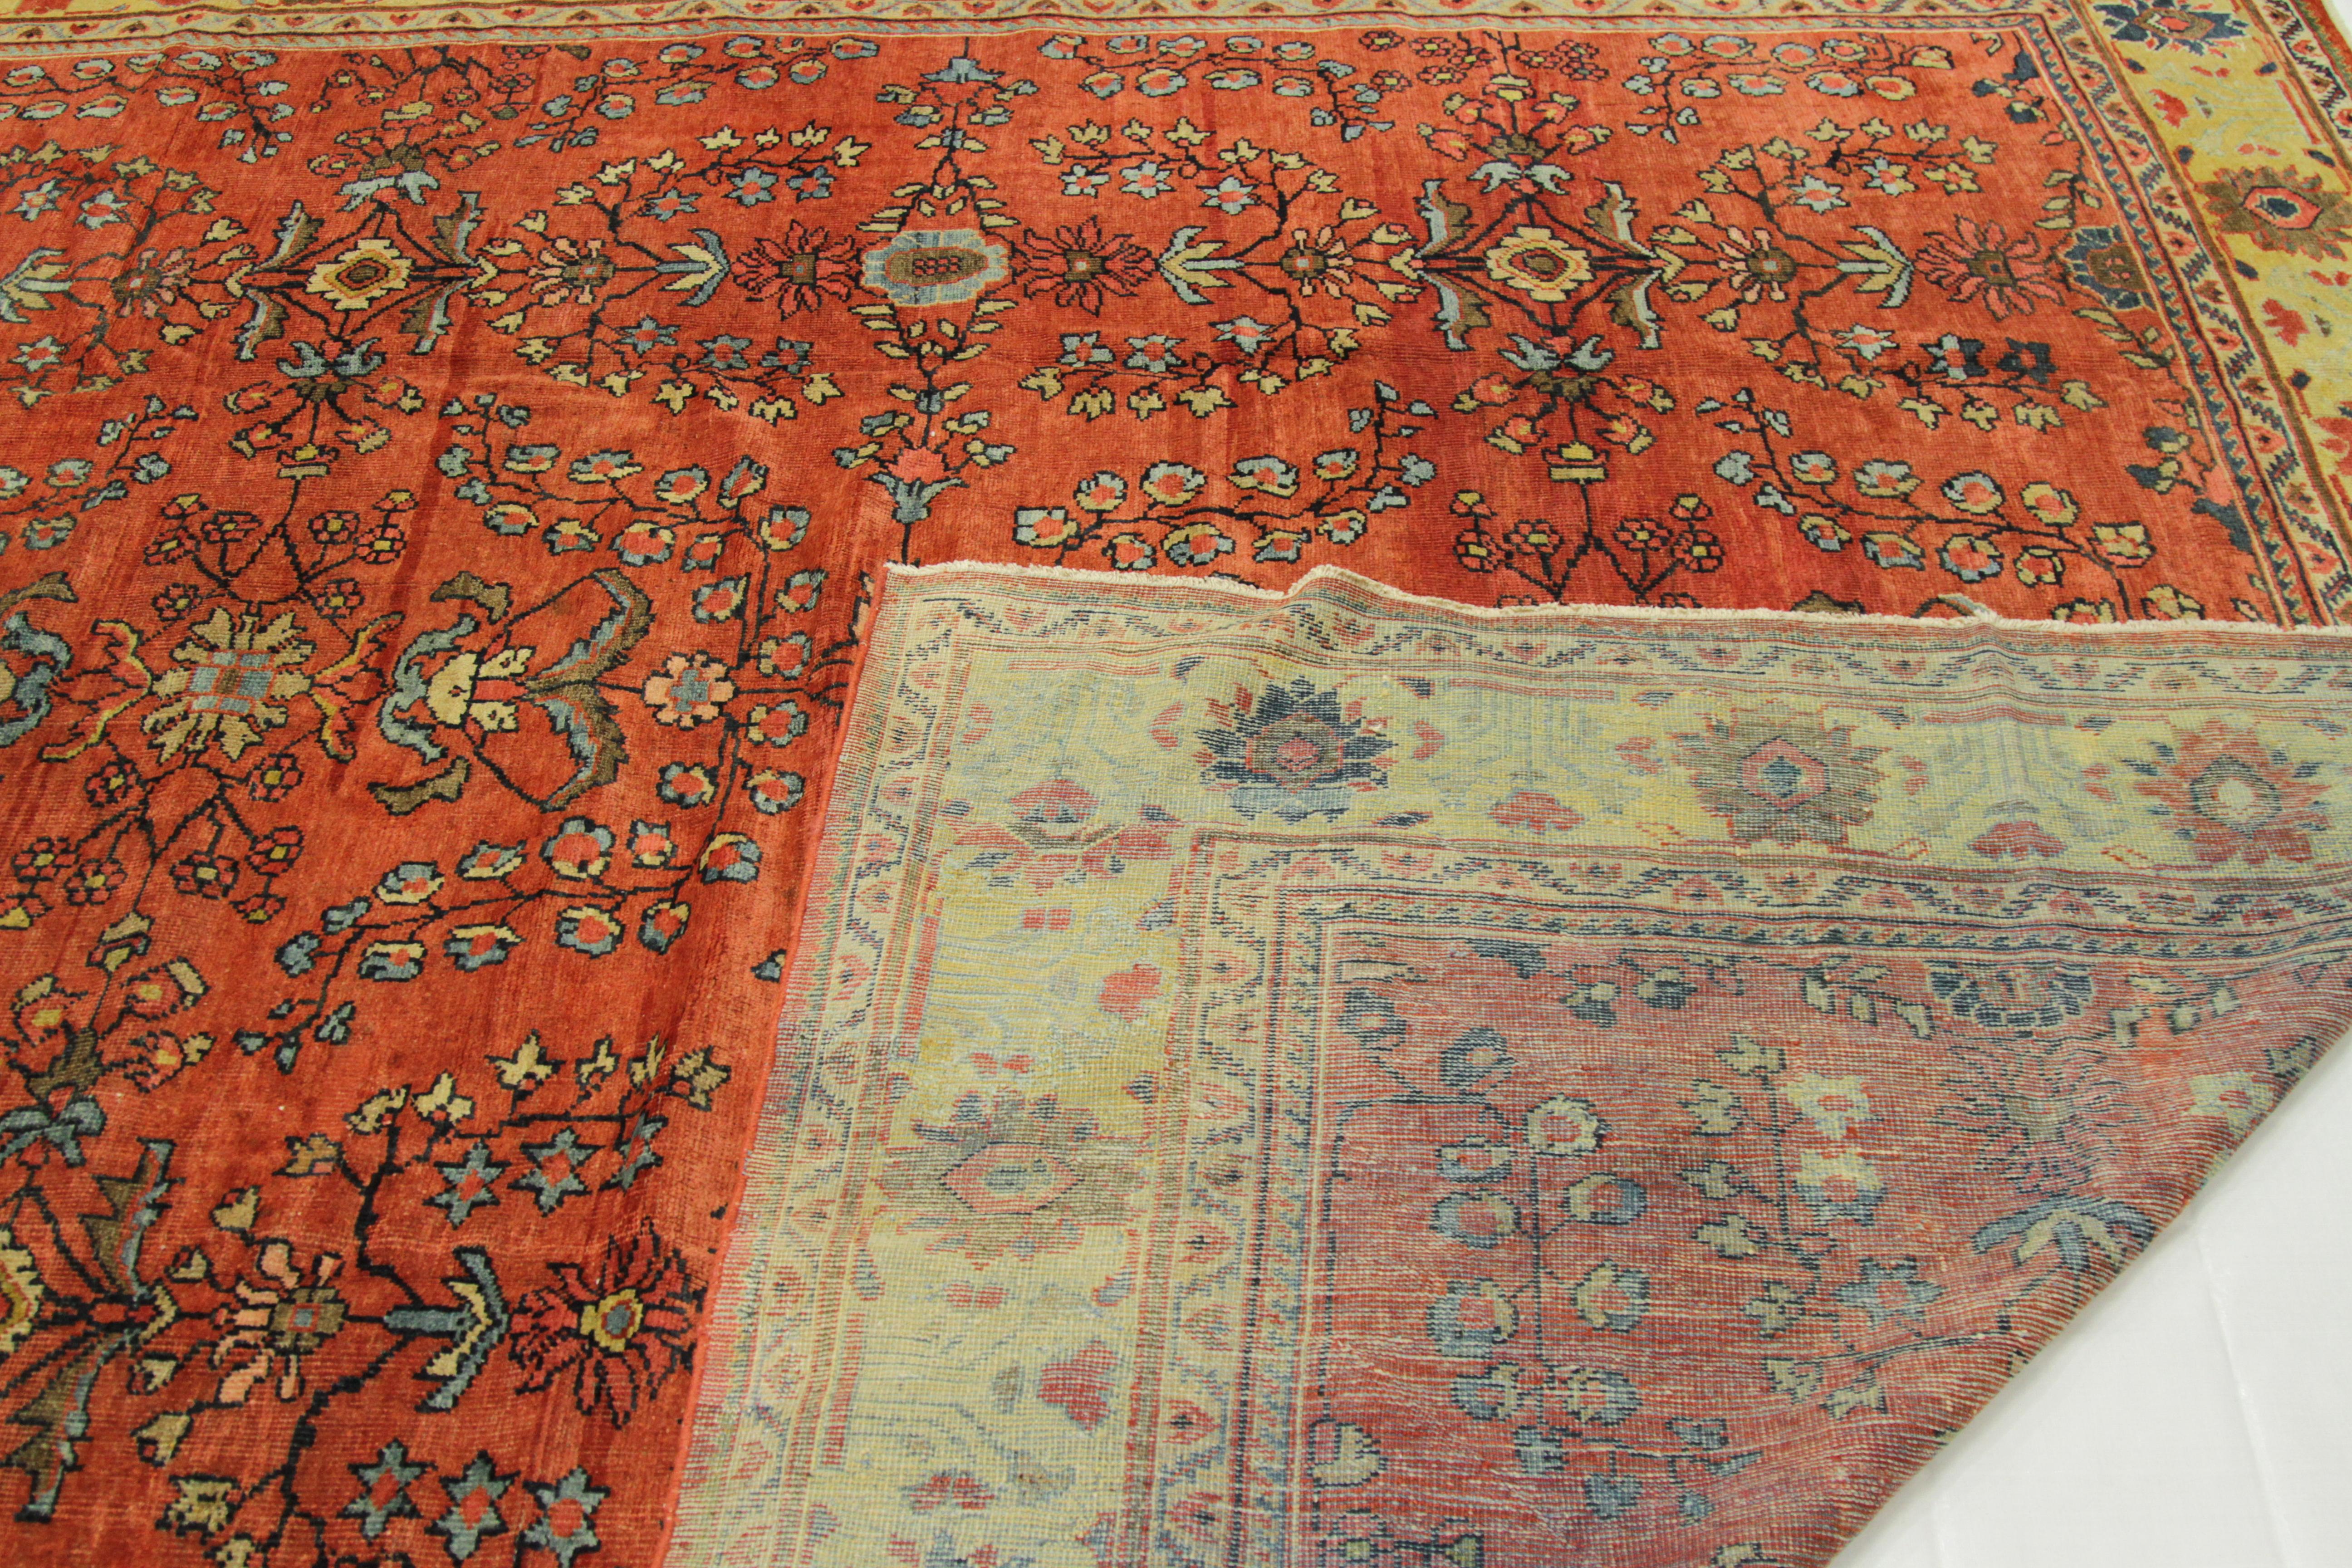 1920s Antique Mahal Persian Rug with Red and Yellow Floral Patterns In Excellent Condition For Sale In Dallas, TX